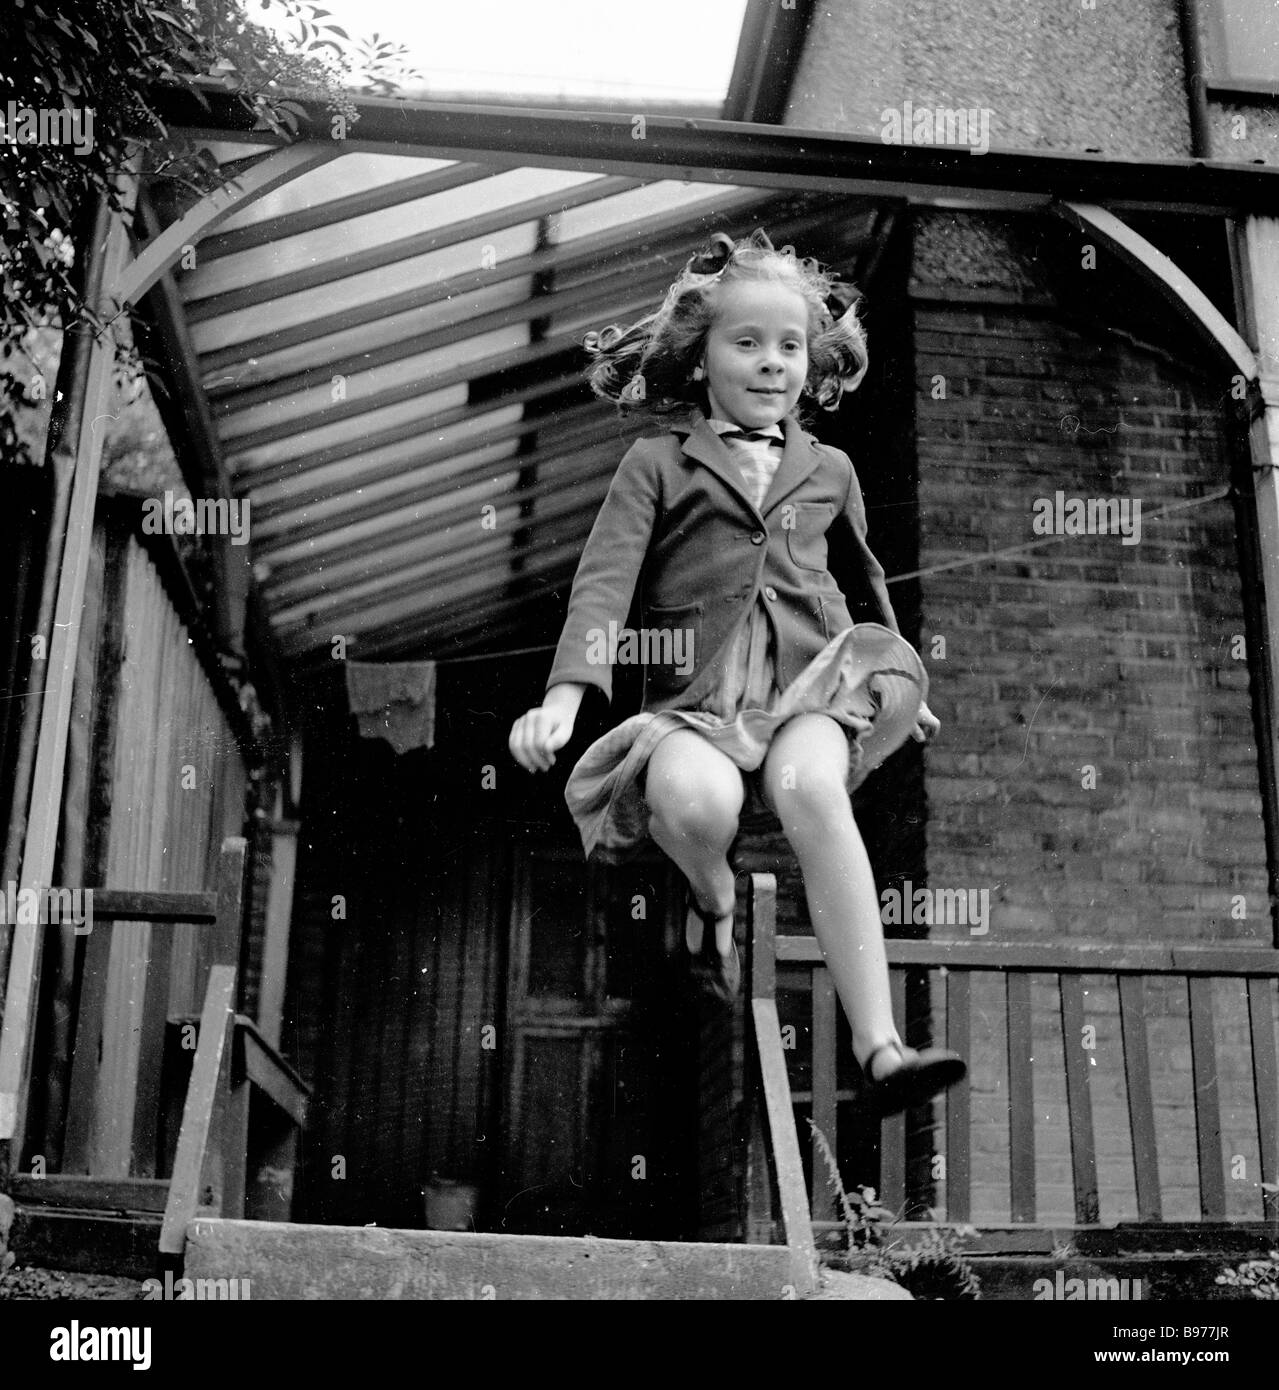 1950s, a young schoolgirl jumping from the back veranda or side porch of a house, London England,UK, in this historical picture by J Allan Cash. Stock Photo